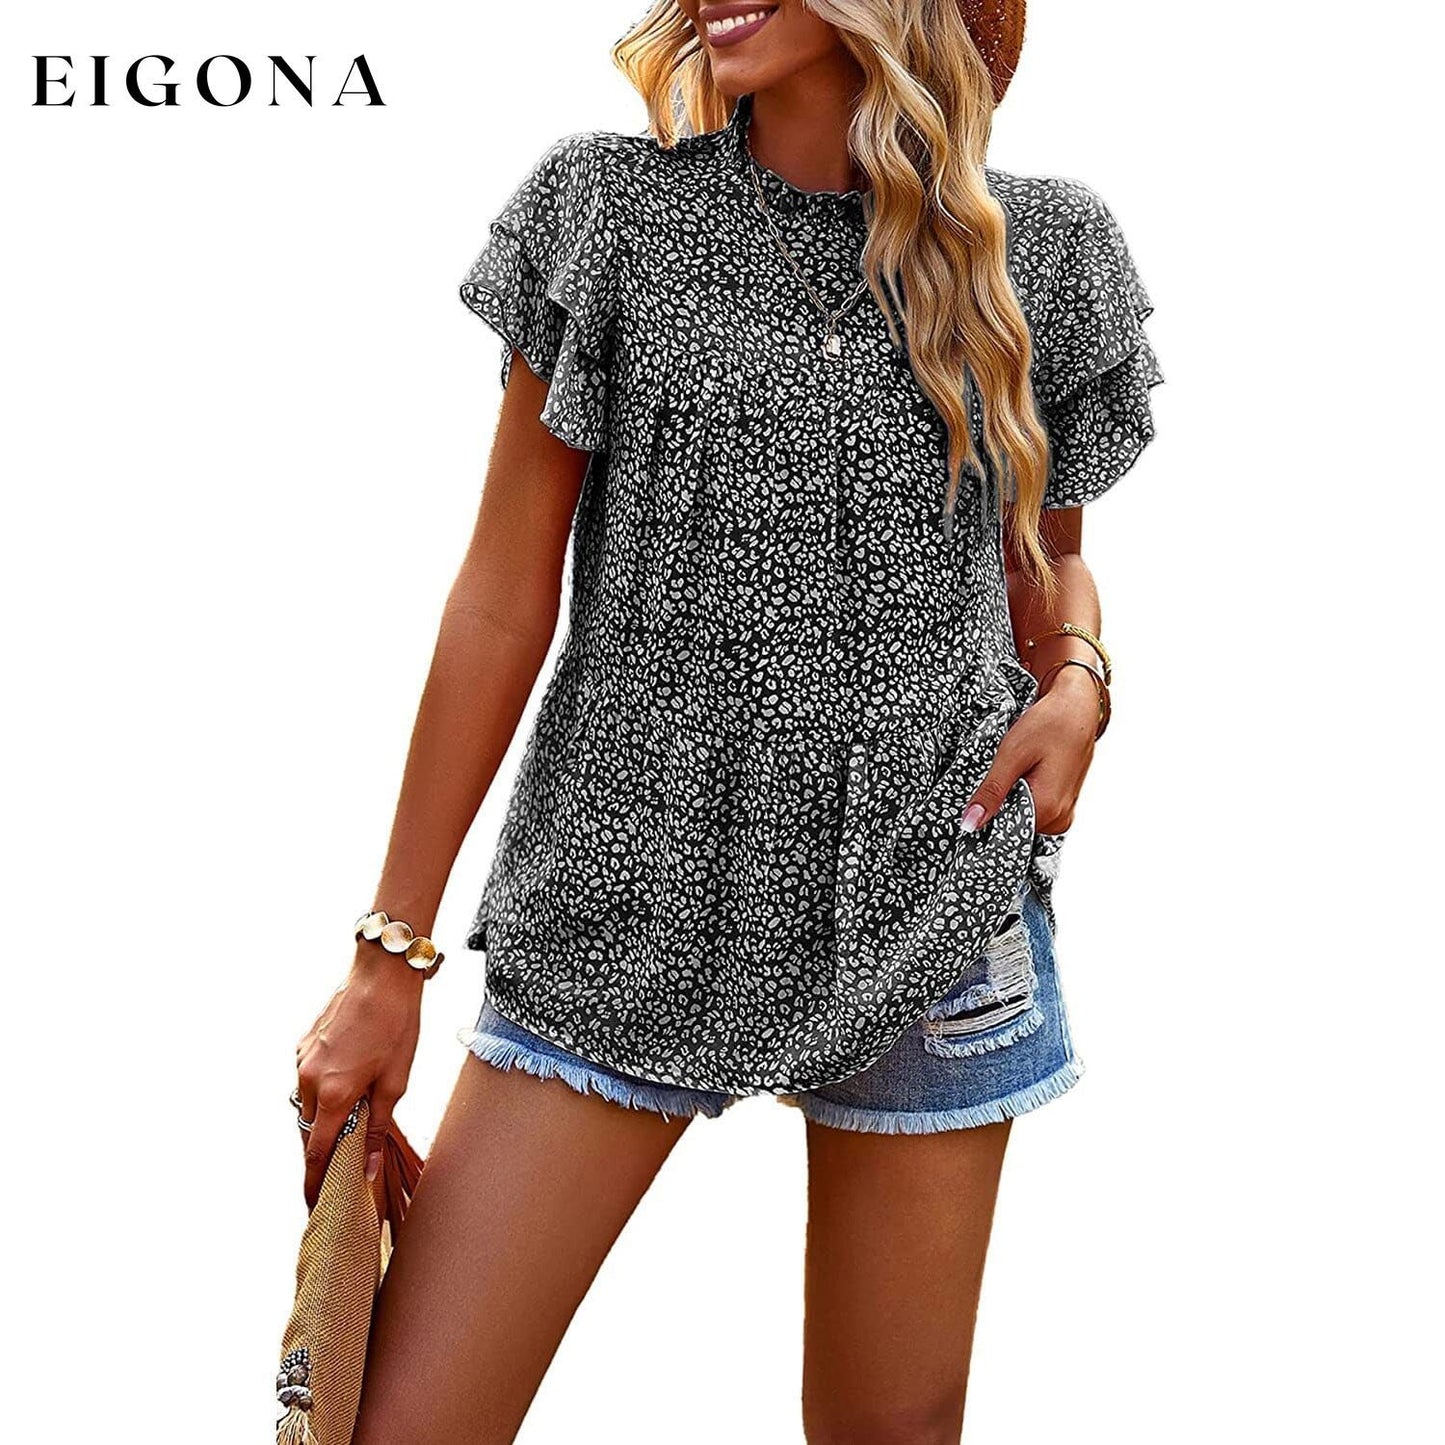 Women's Casual Summer Tops Ruffle Short Sleeve Mock Neck Fashion Floral Chiffon Blouse Shirts Black __stock:200 clothes refund_fee:1200 tops